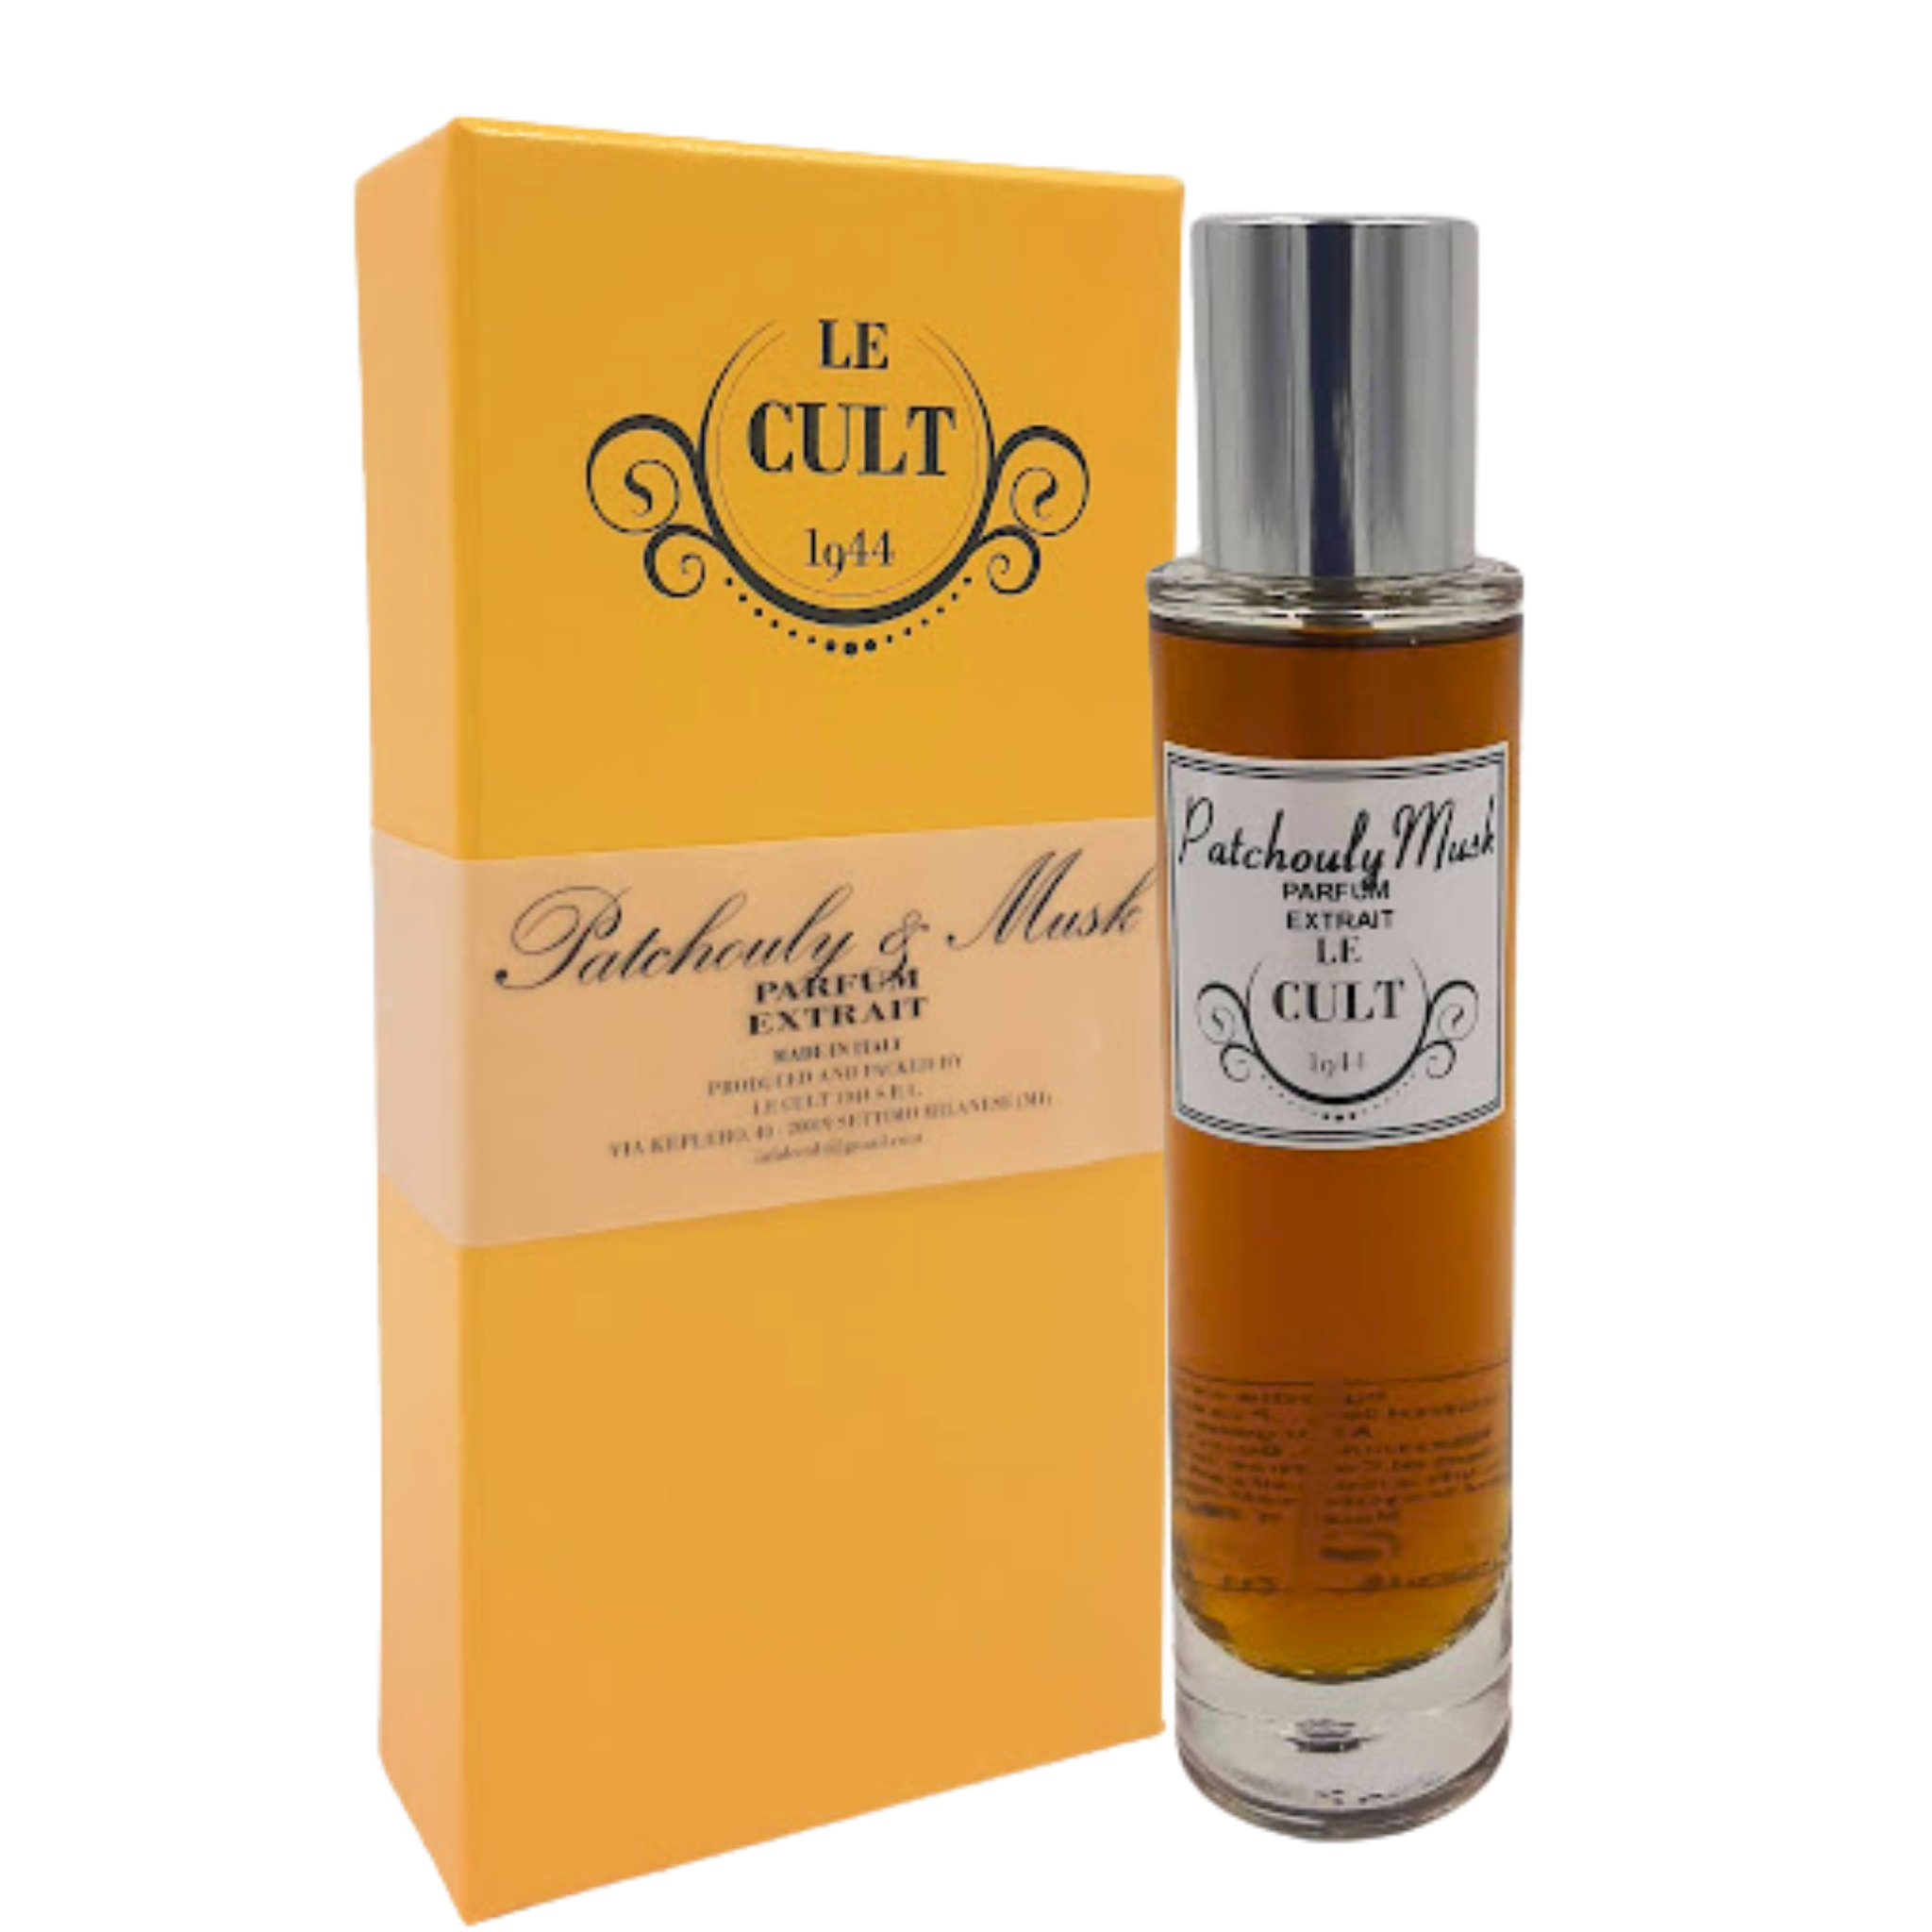 Patchouly & Musk - 50ml